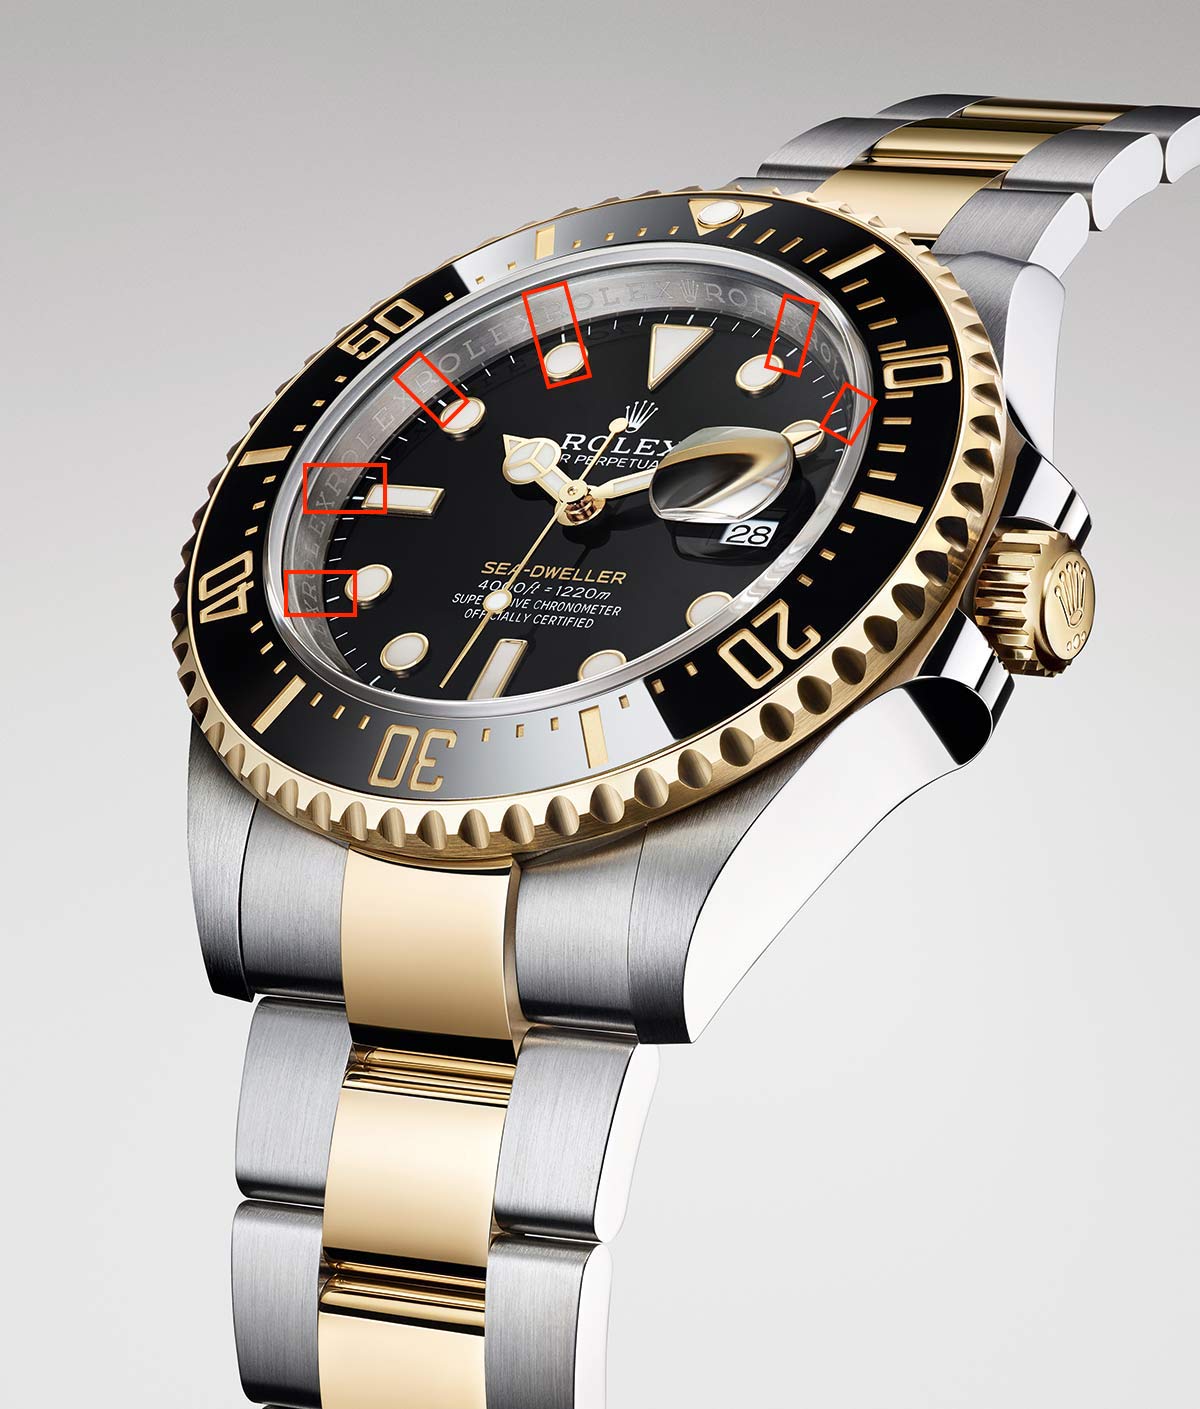 how to tell if a yacht master is fake